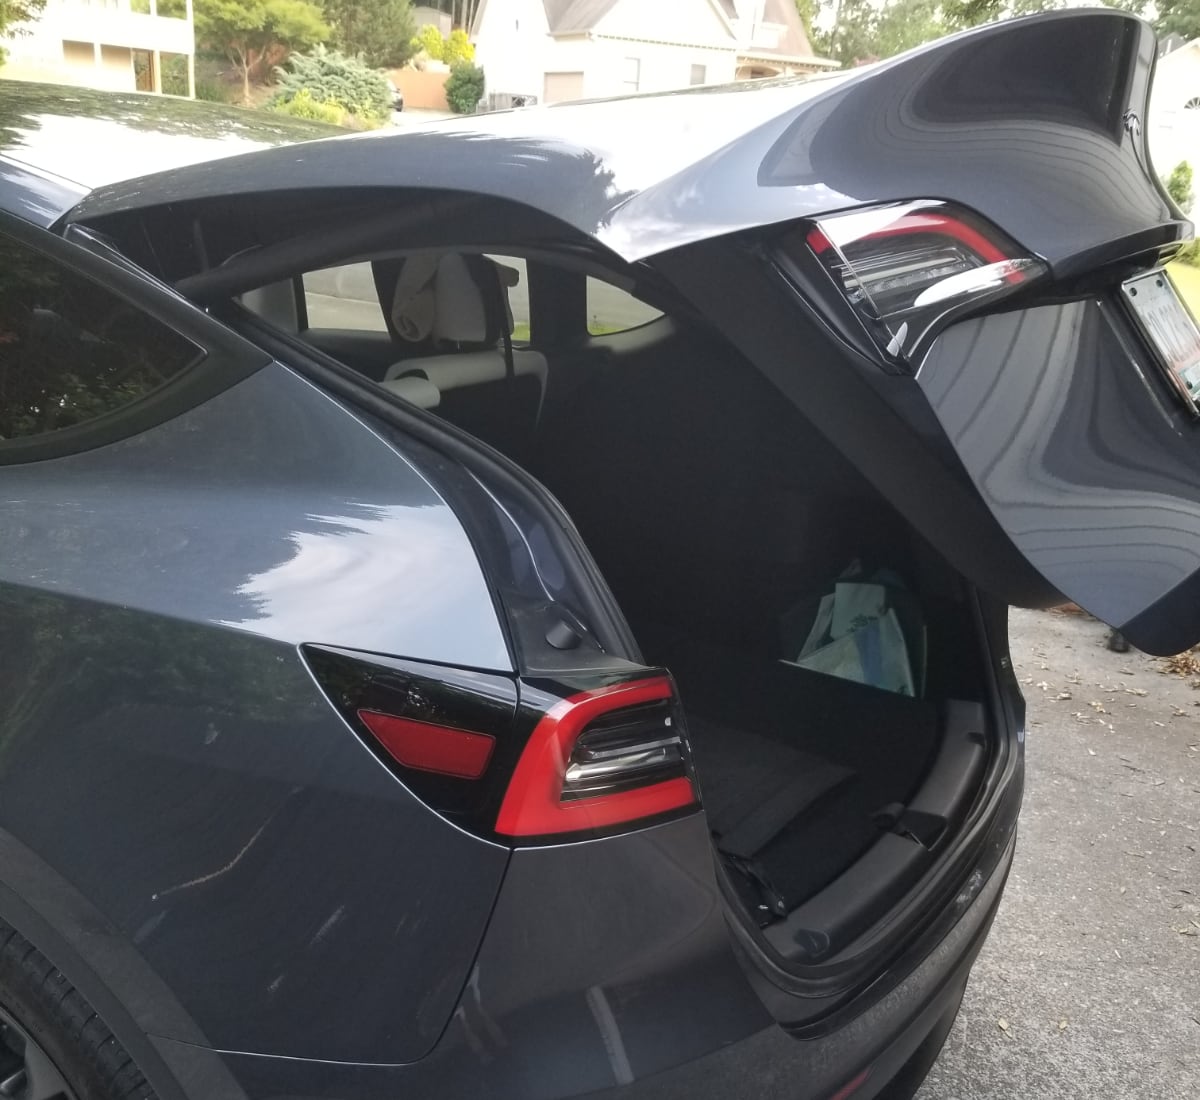 Trouble with Phone Compatibility and Trunk Issues in Your Tesla: Here's What You Need to Know